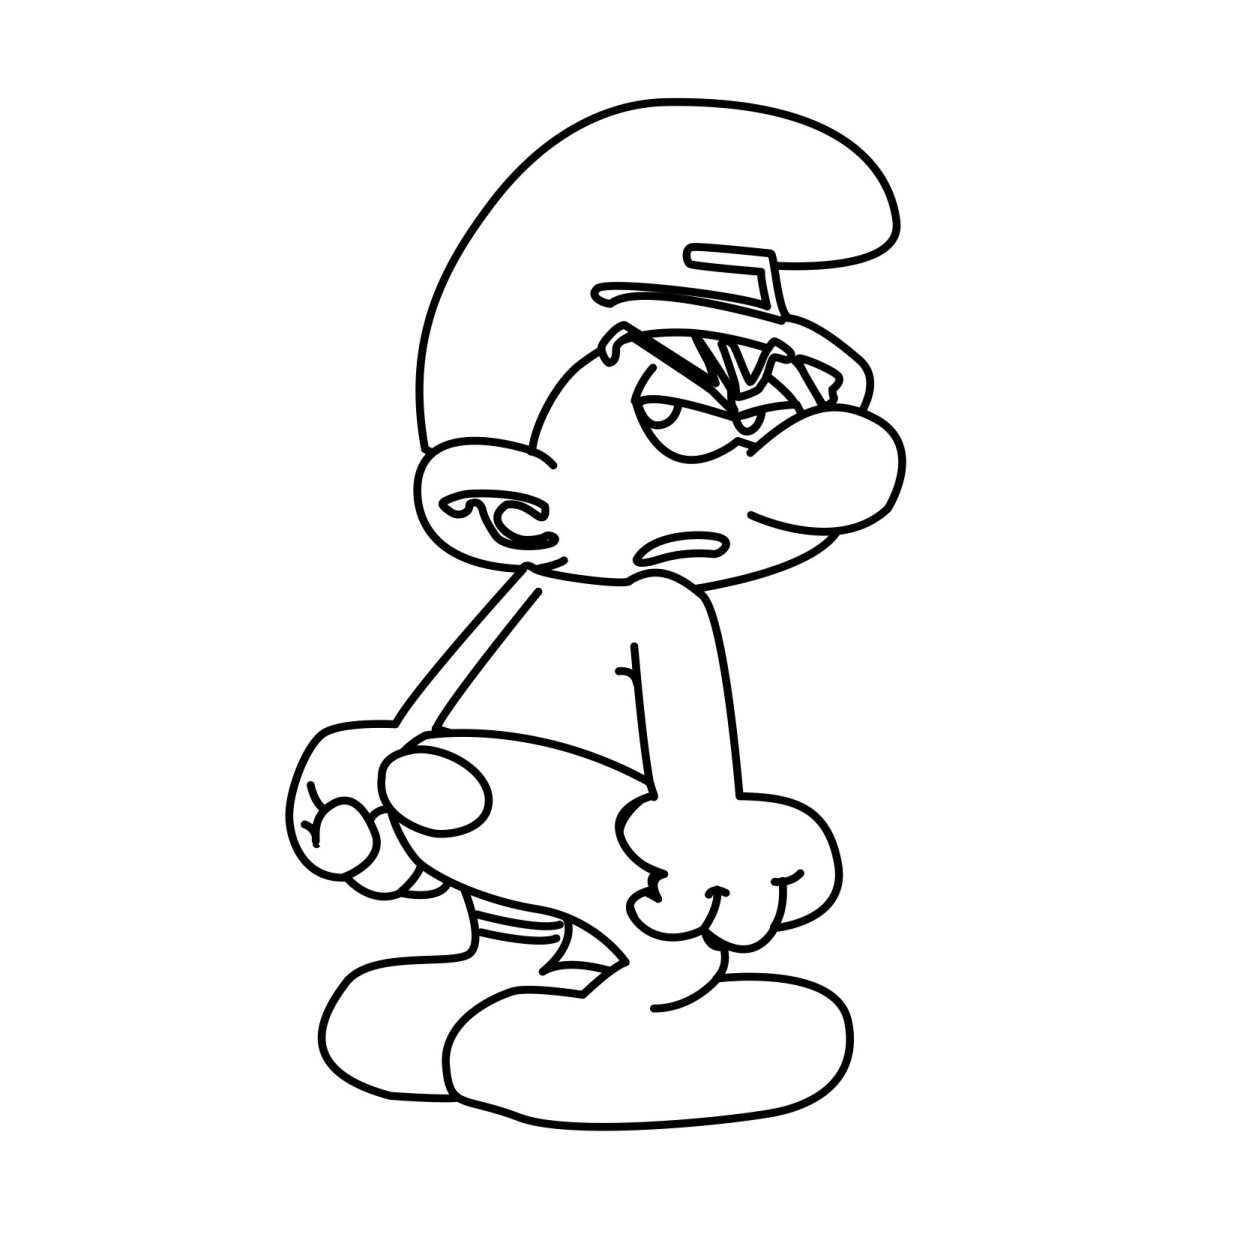 Enjoy hours of Smurfs coloring pages 19